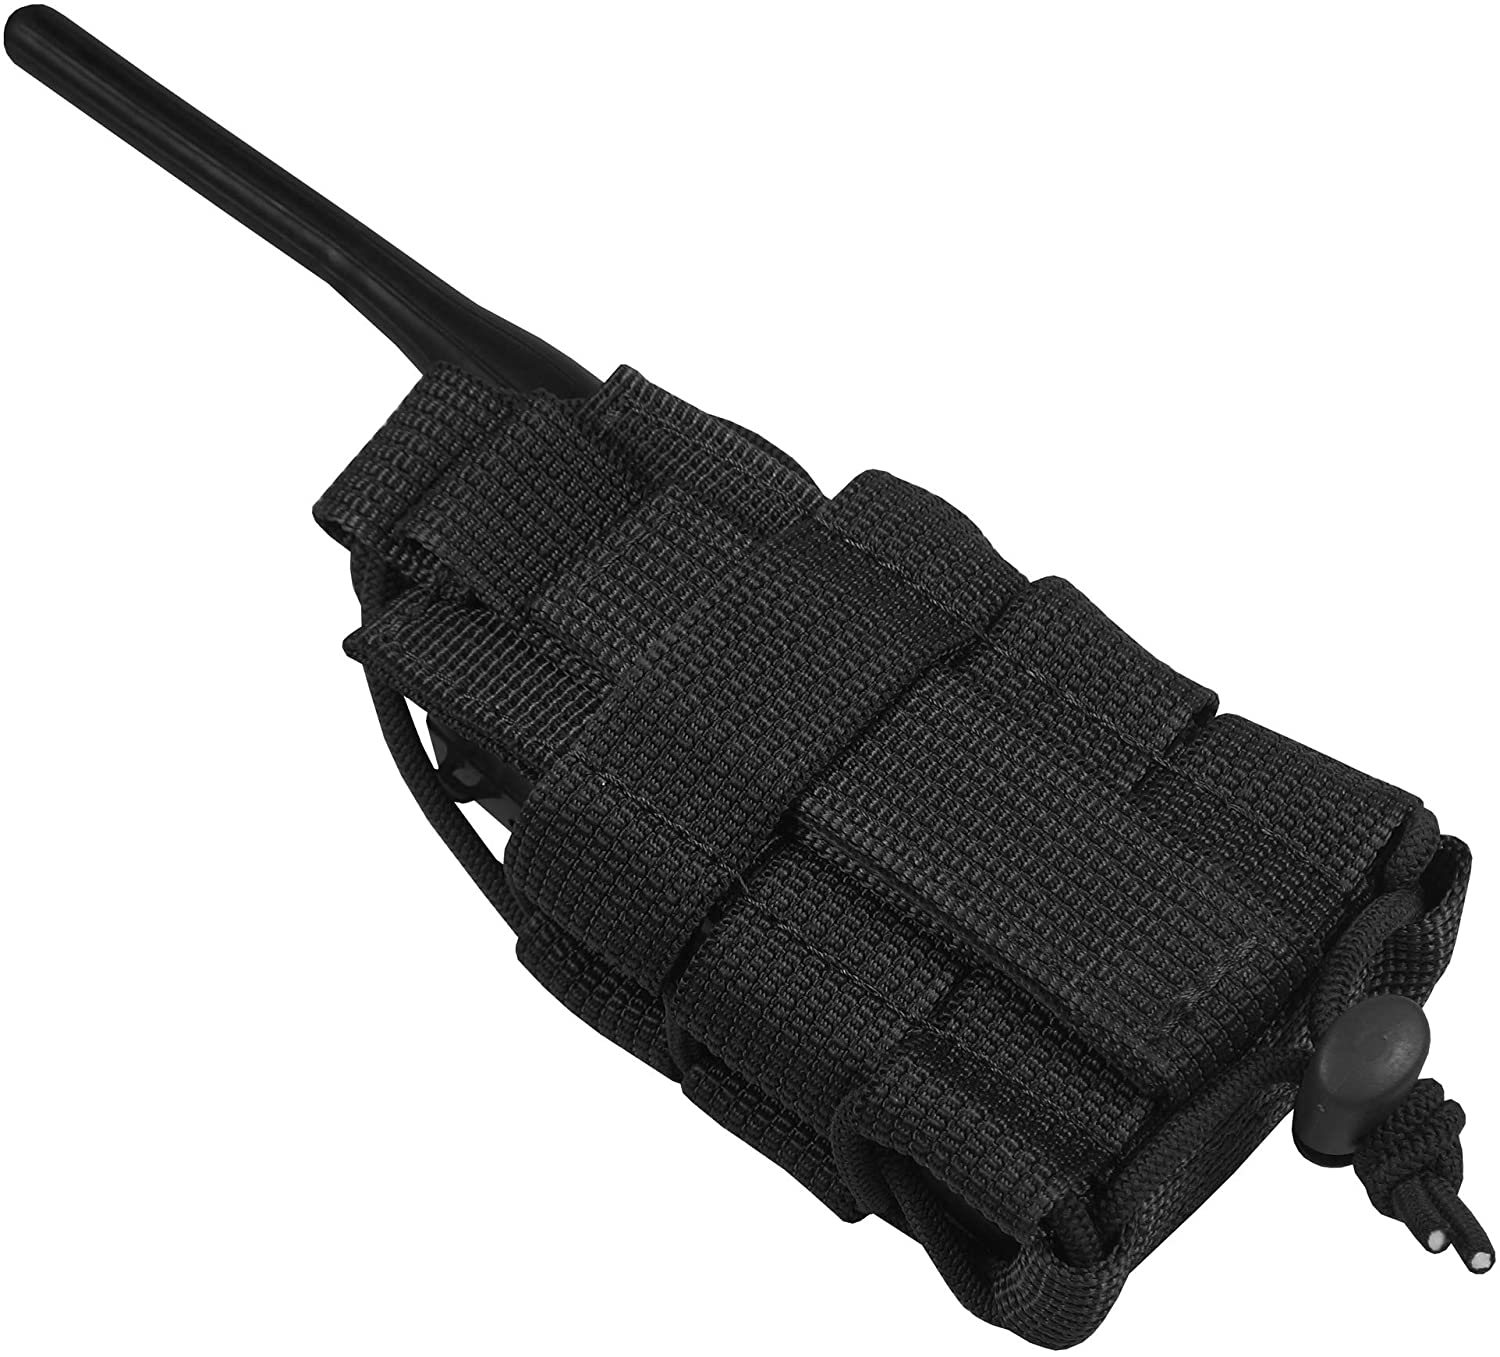 Tactical MOLLE Radio Pouch - Black (New Old Stock)